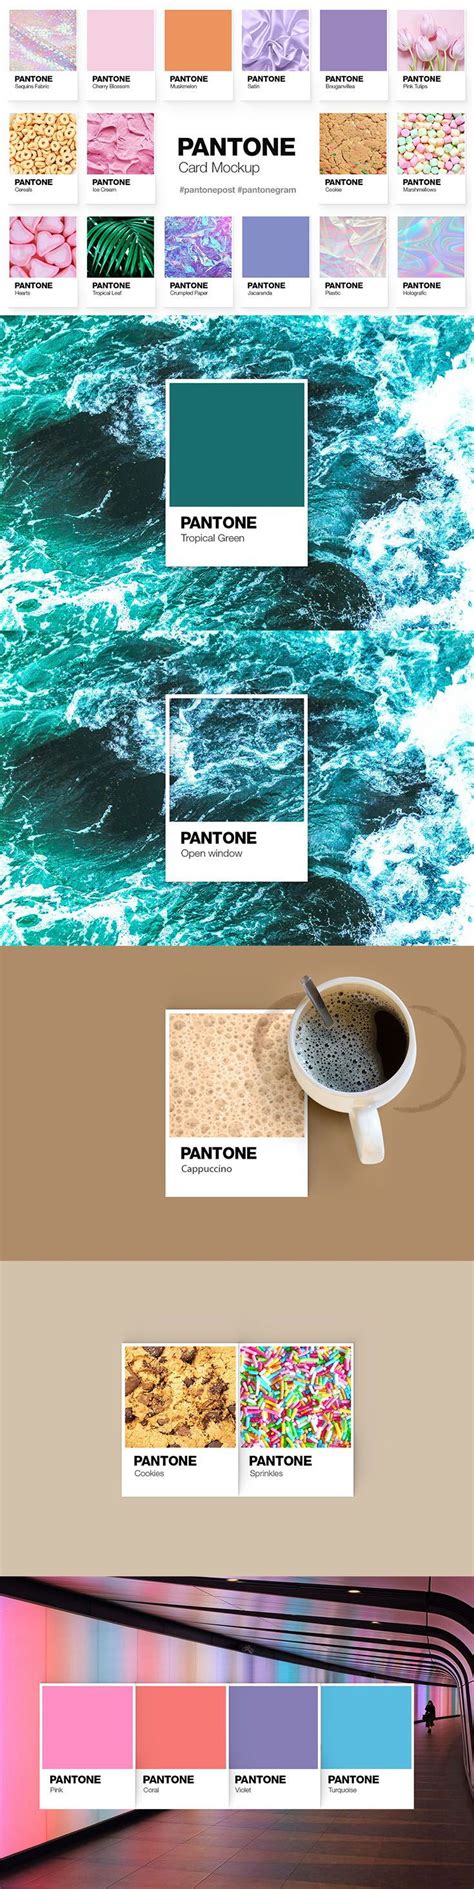 Pantone Color Cards Mockup | Color card, Pantone color, Color of the day